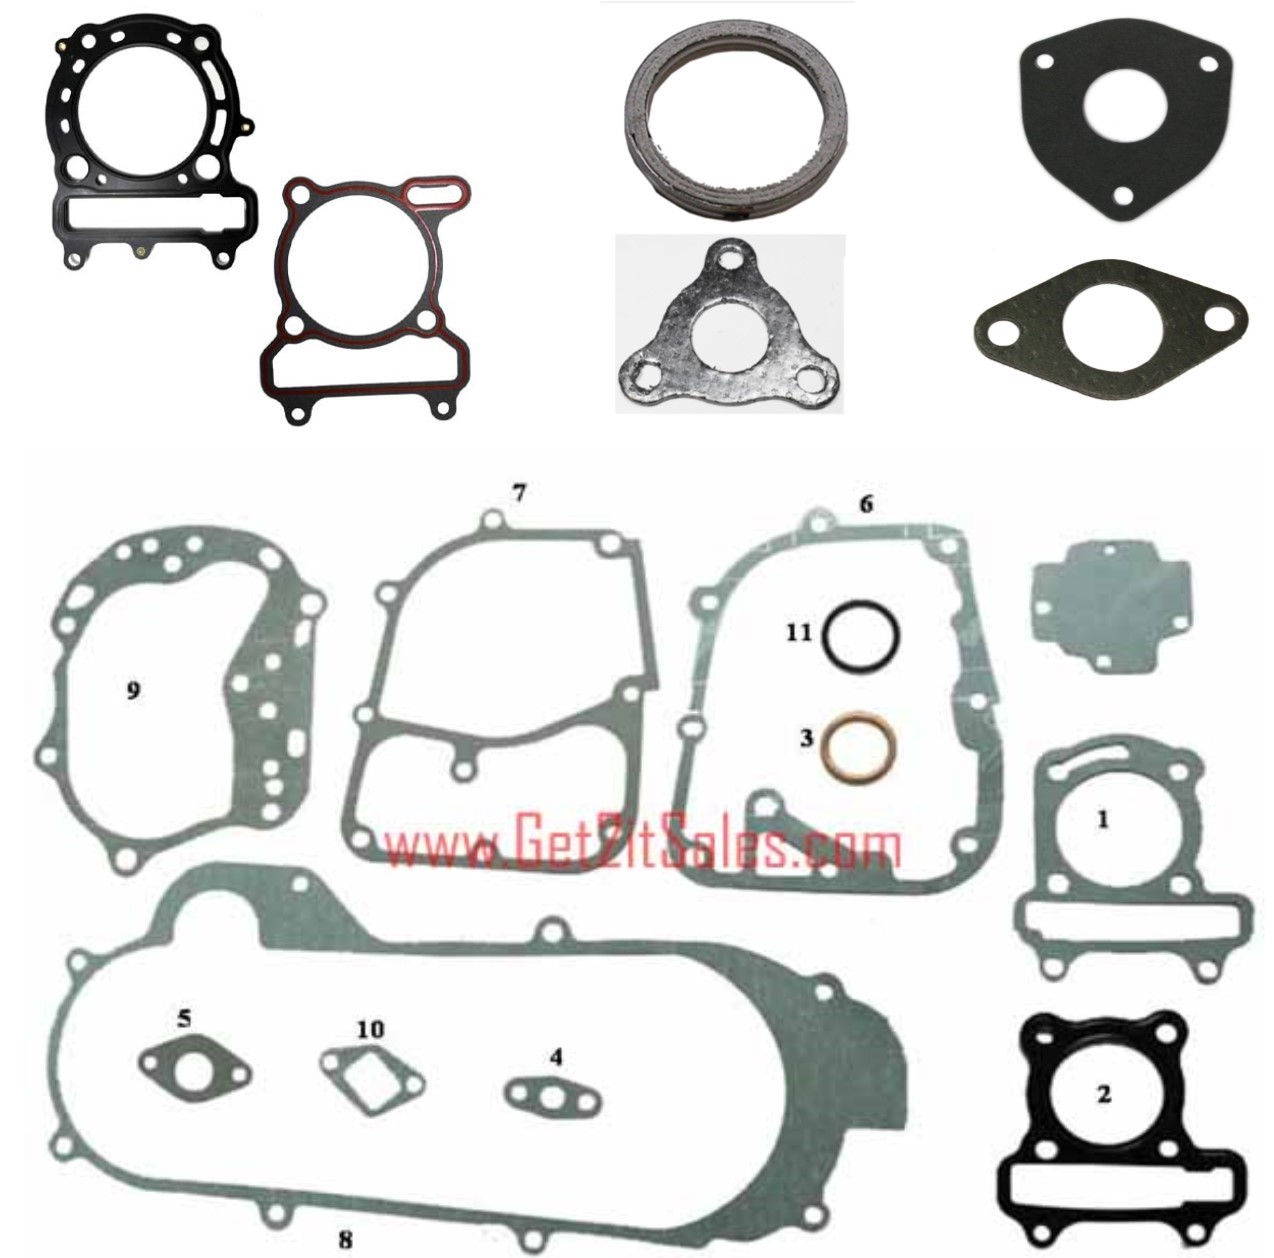 Gaskets & Gasket Sets For Most 49-300cc Engines Honda Type, GY6, CG, VOG, YP